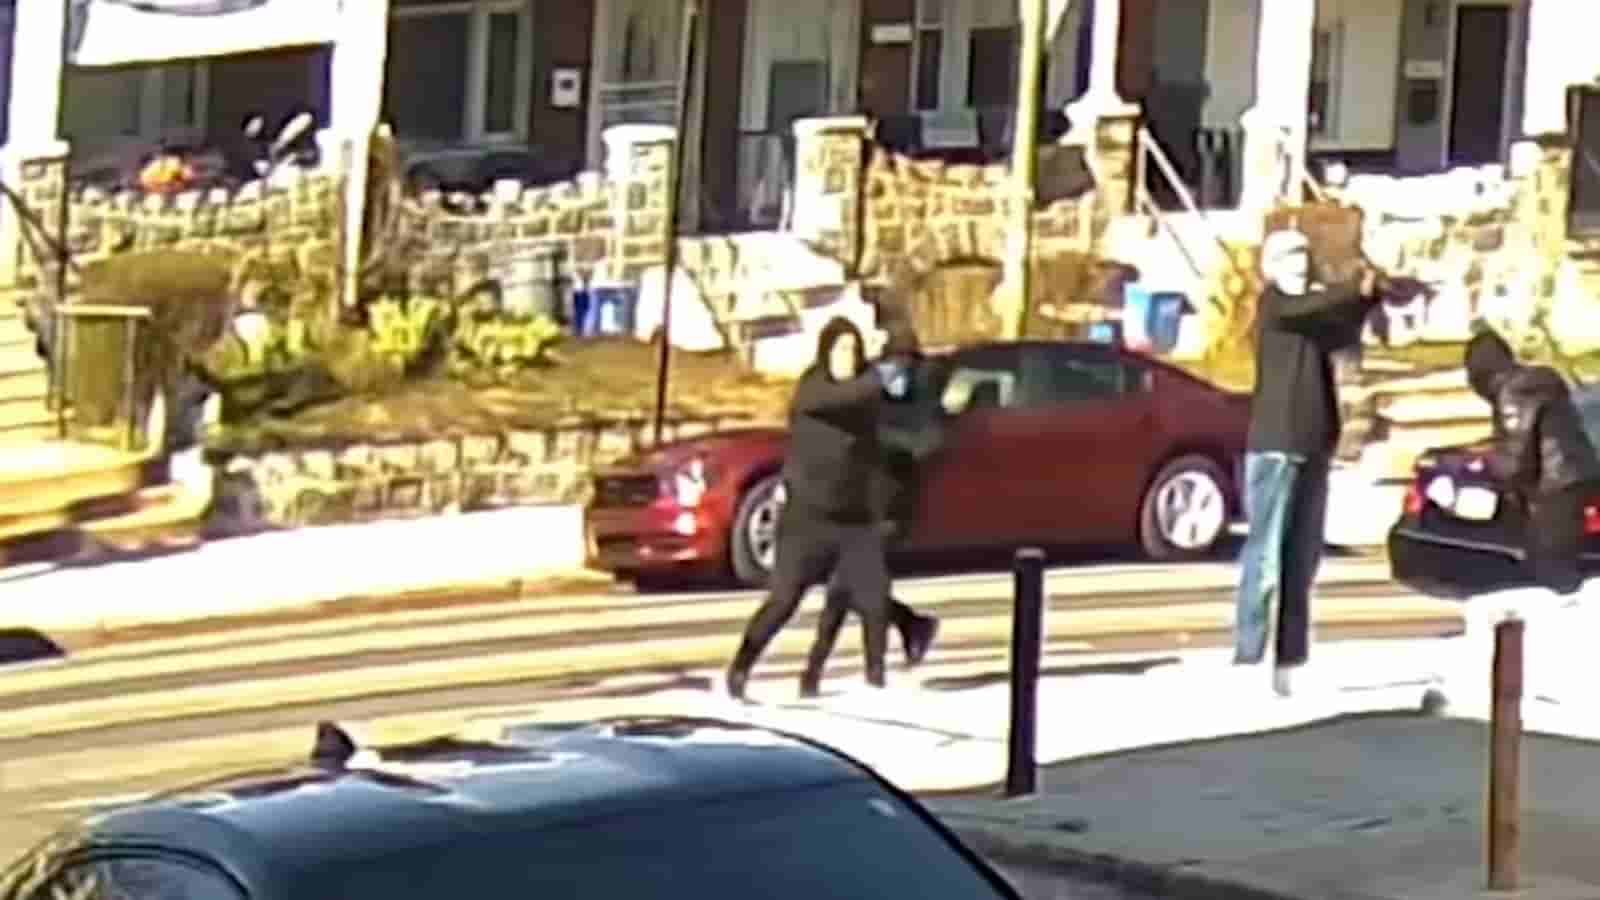 Caught on video: 4 suspects wanted in West Philadelphia shooting that injured 3 teens